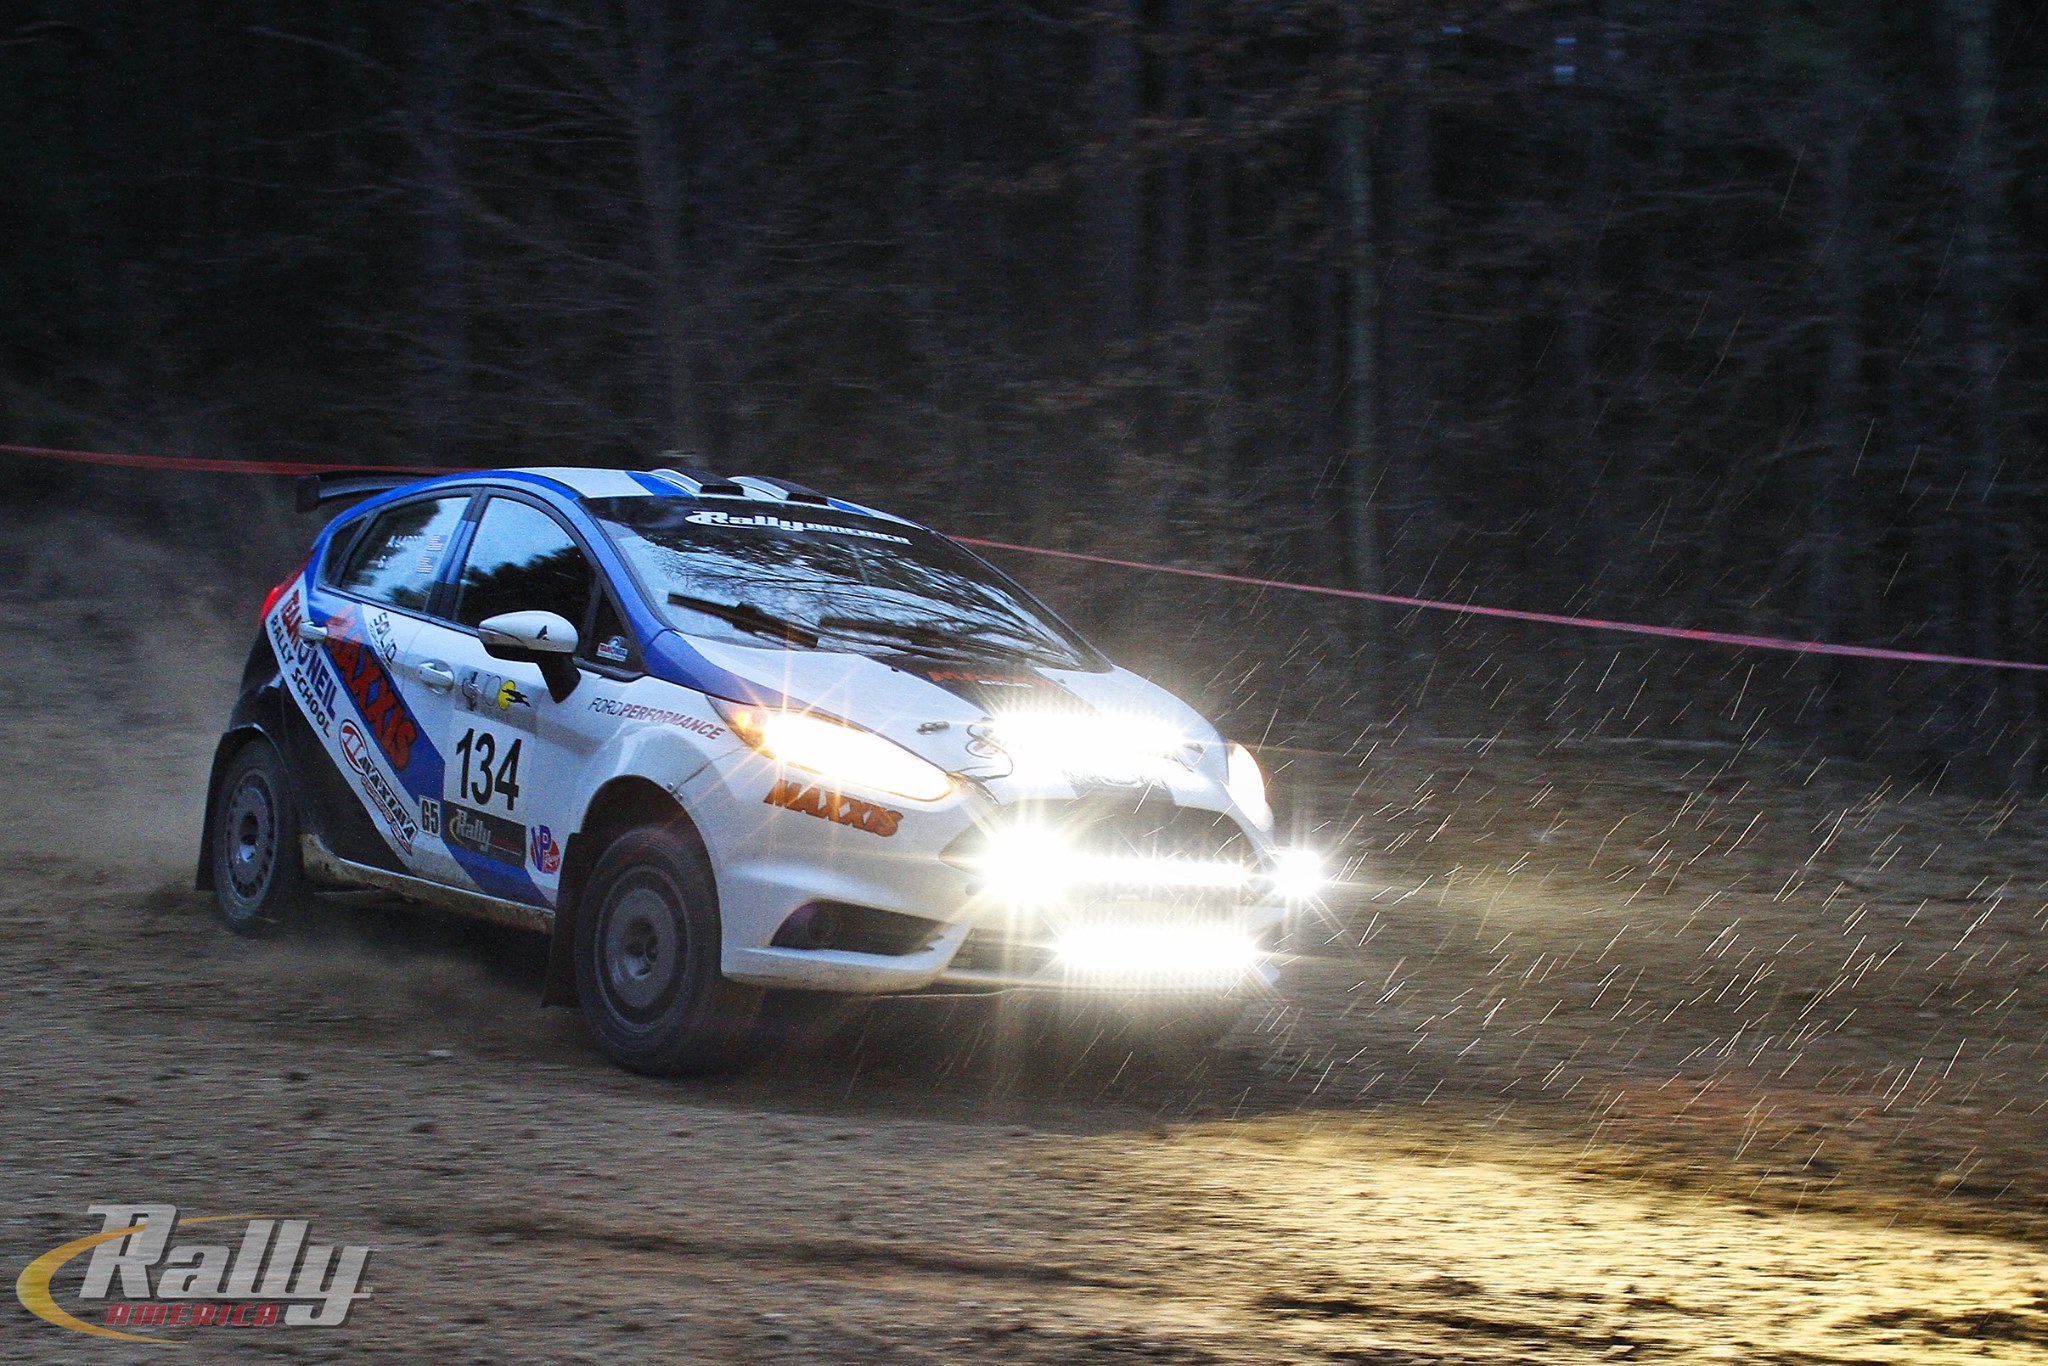 Steve and Alison LaRoza at 2016 100 Acre Wood - Courtesy of Rally America